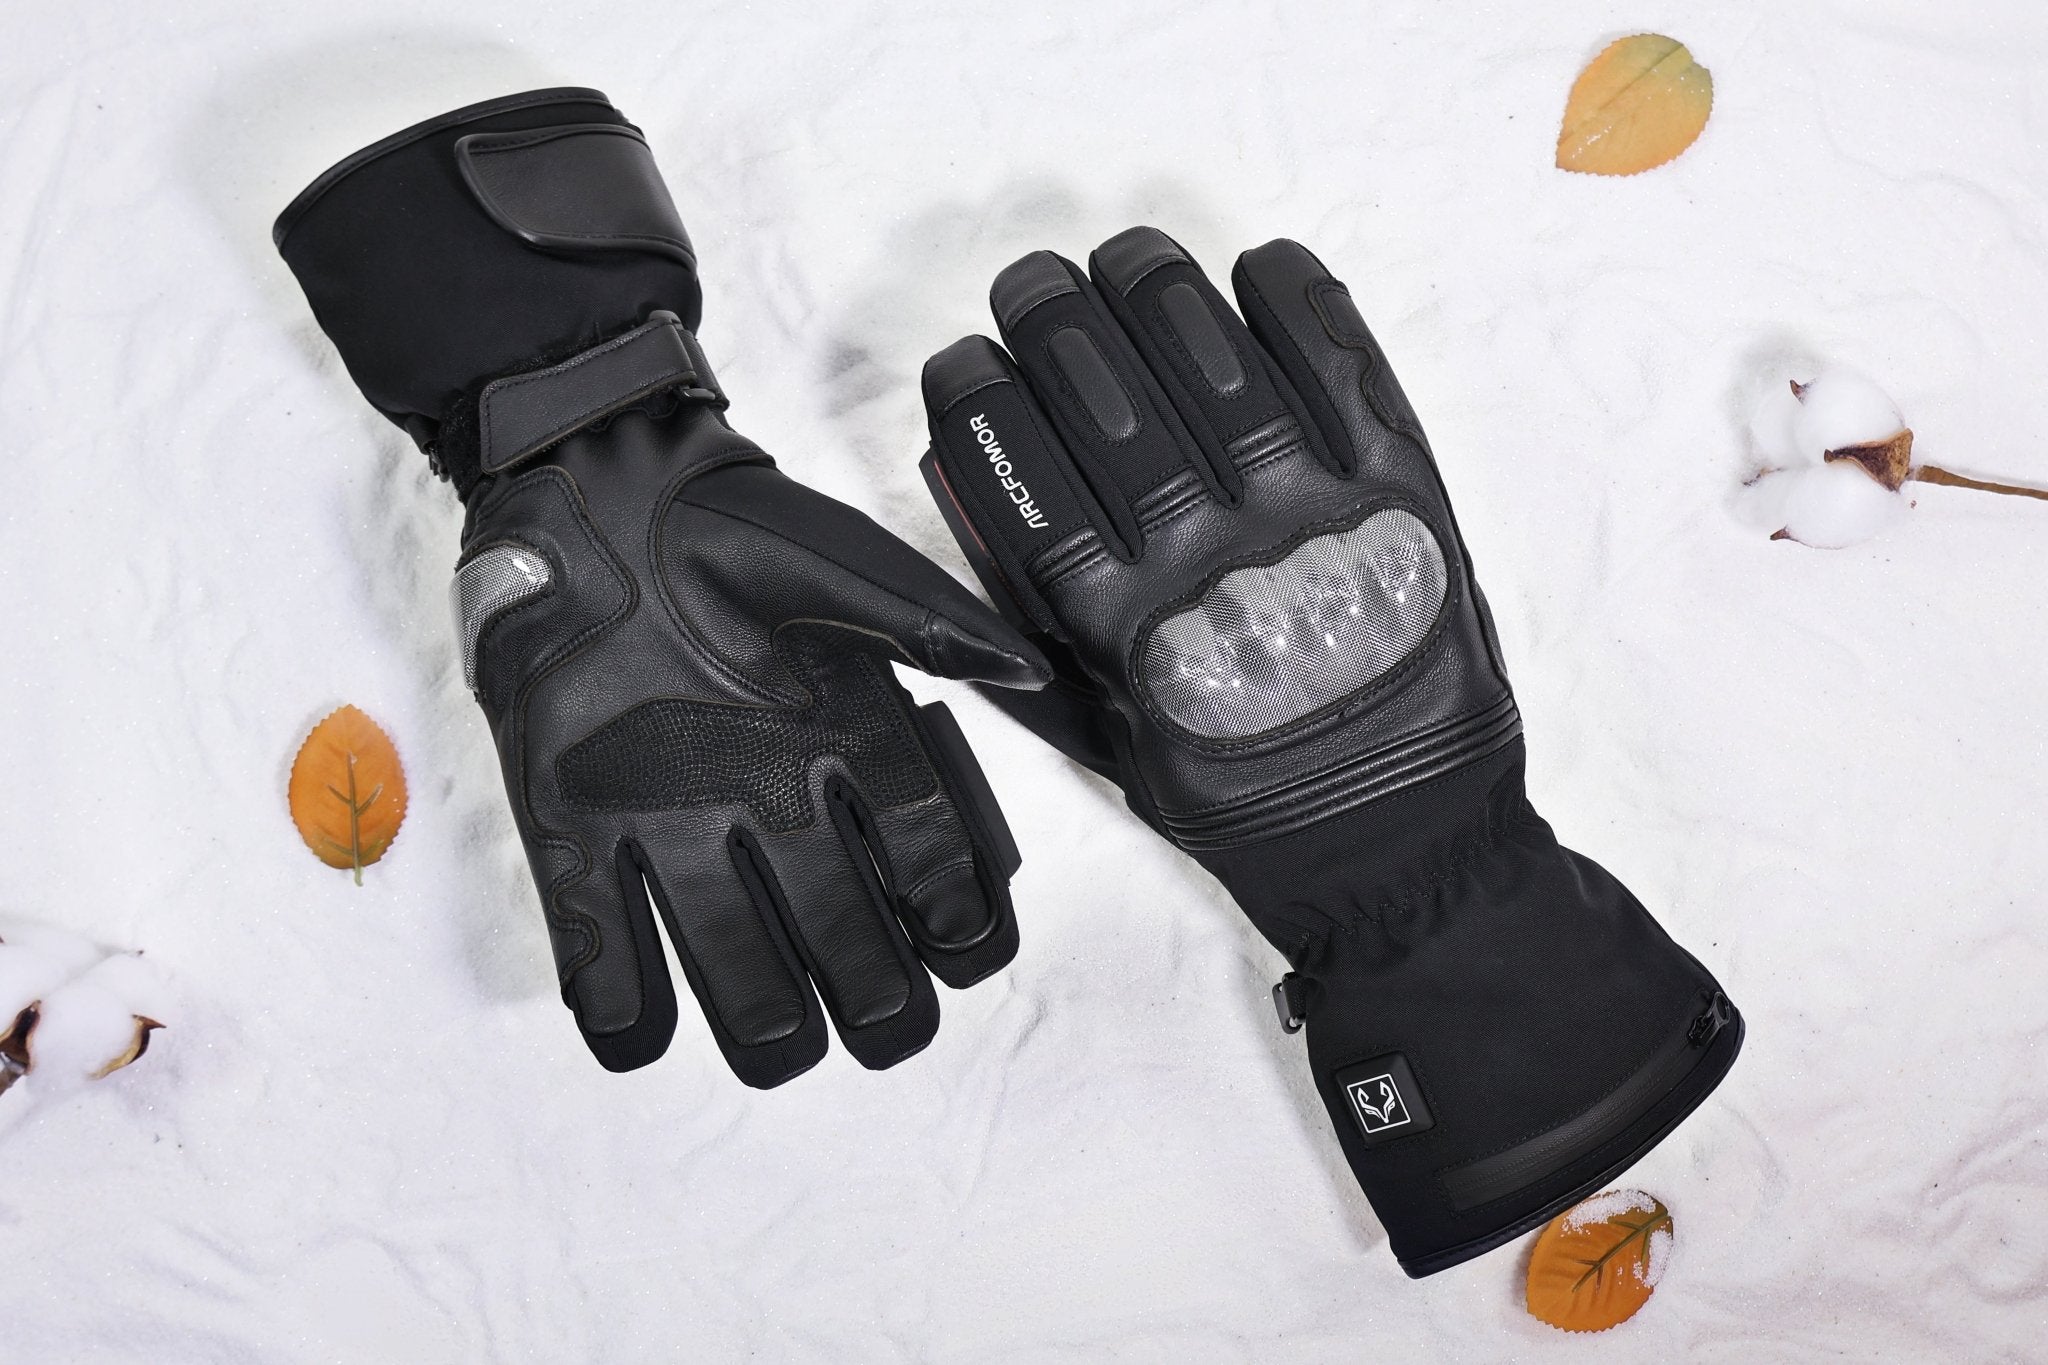 Hot Winter Sale banner featuring Officially Recommended selection of high-quality, stylish winter gloves.